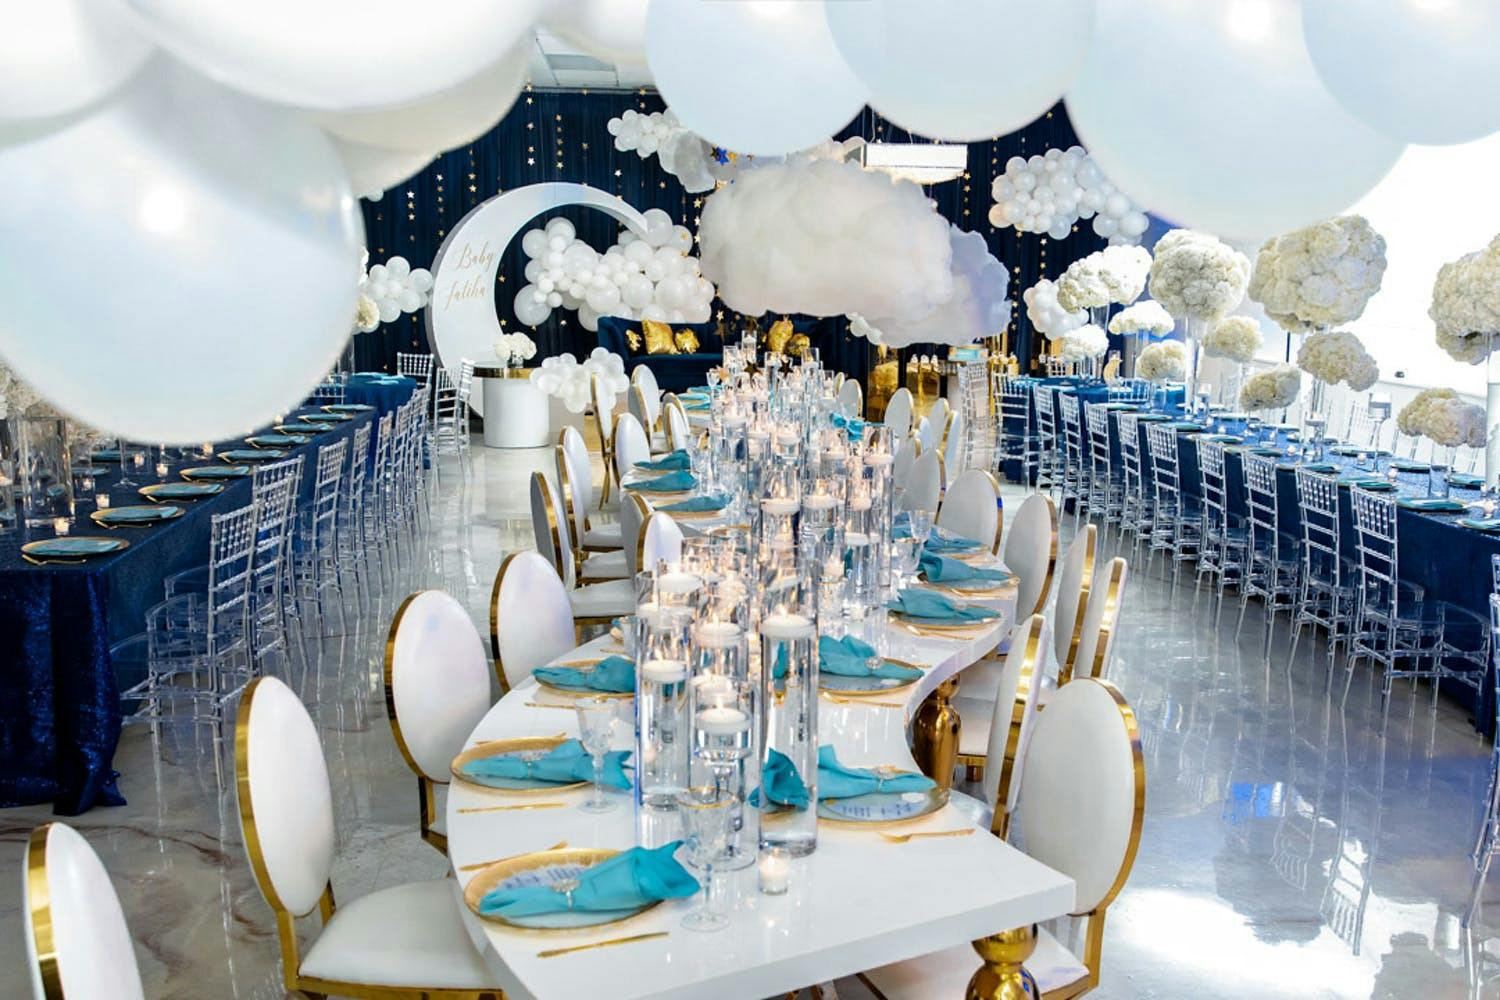 Twinkle Twinkle-Themed Baby Shower With Winding Table and White Balloon Ceiling Décor | PartySlate